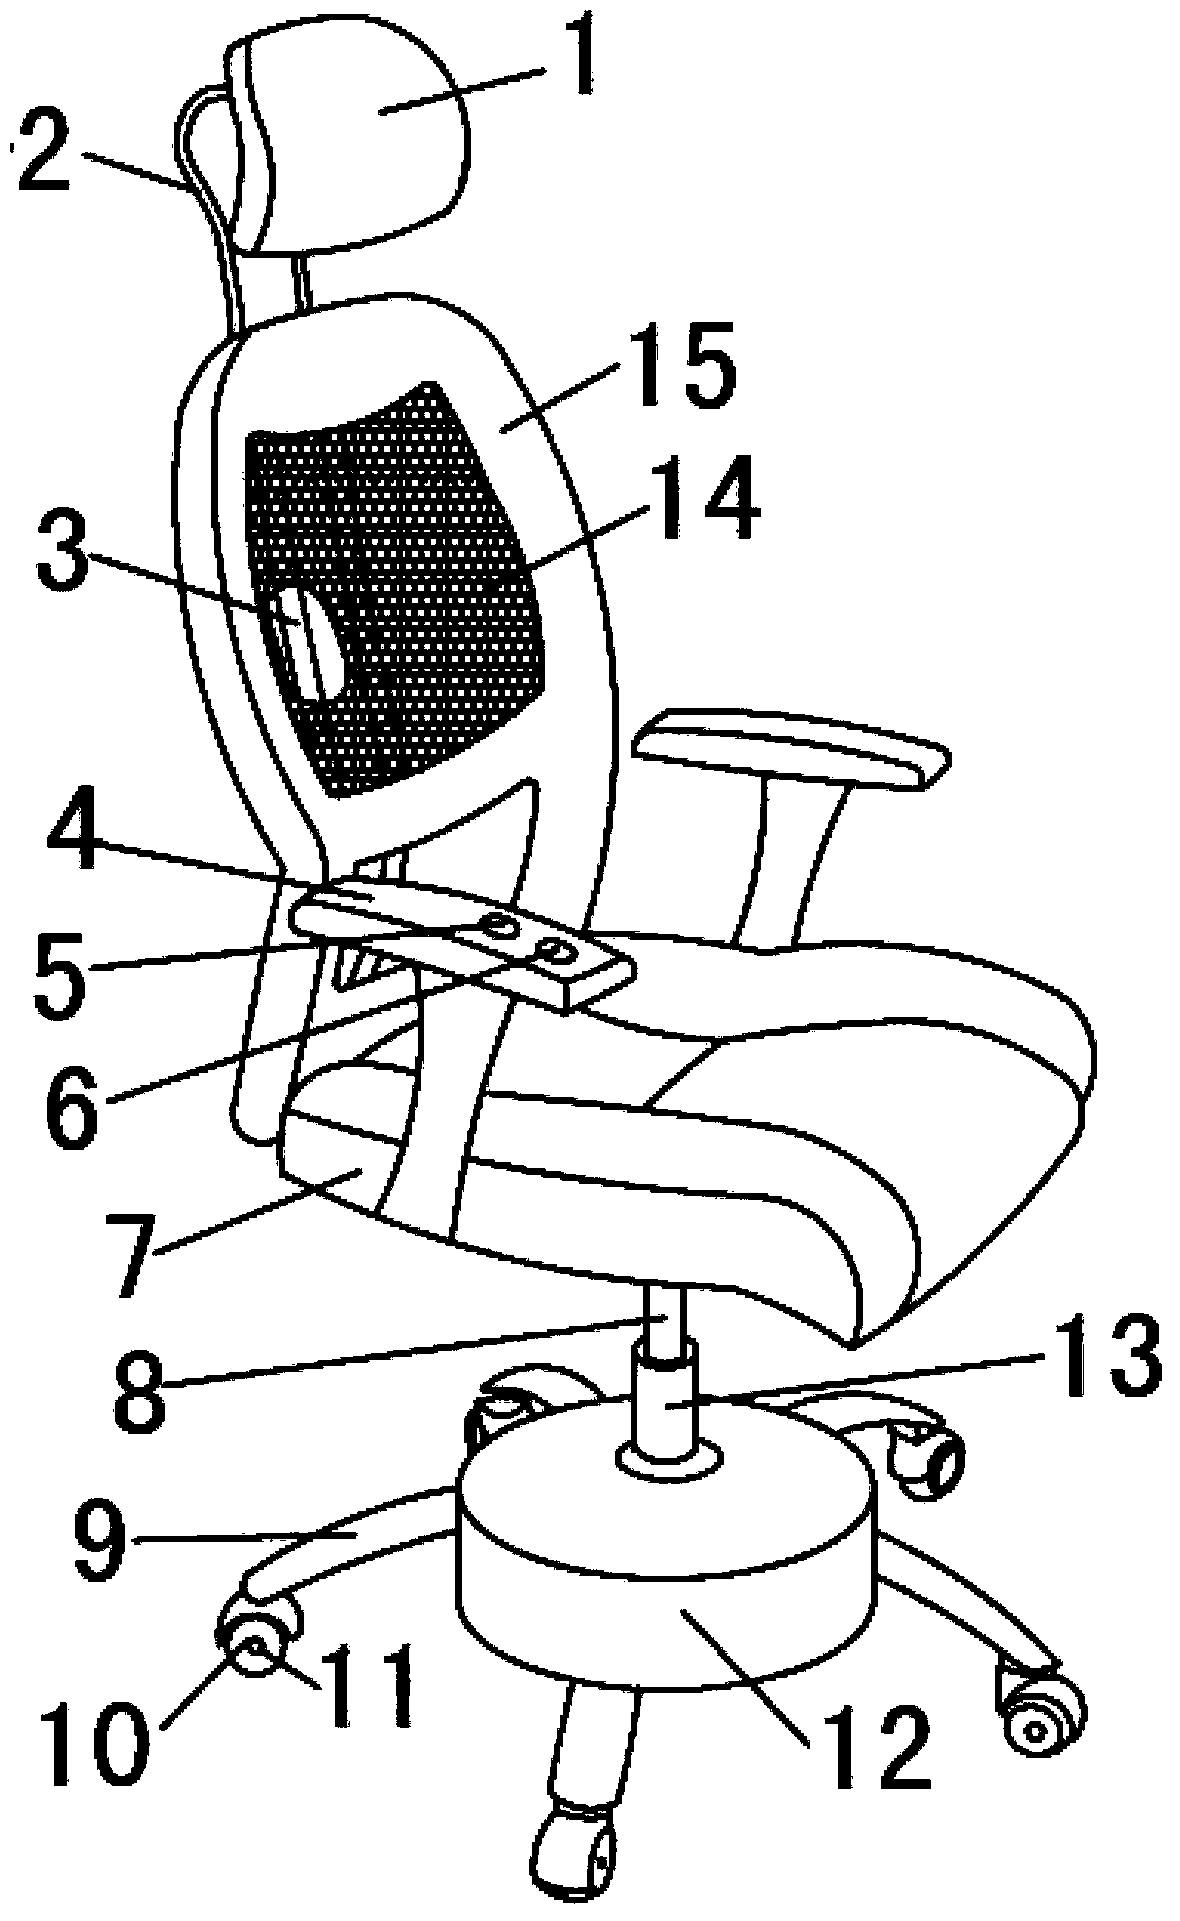 Automatic lifting chair